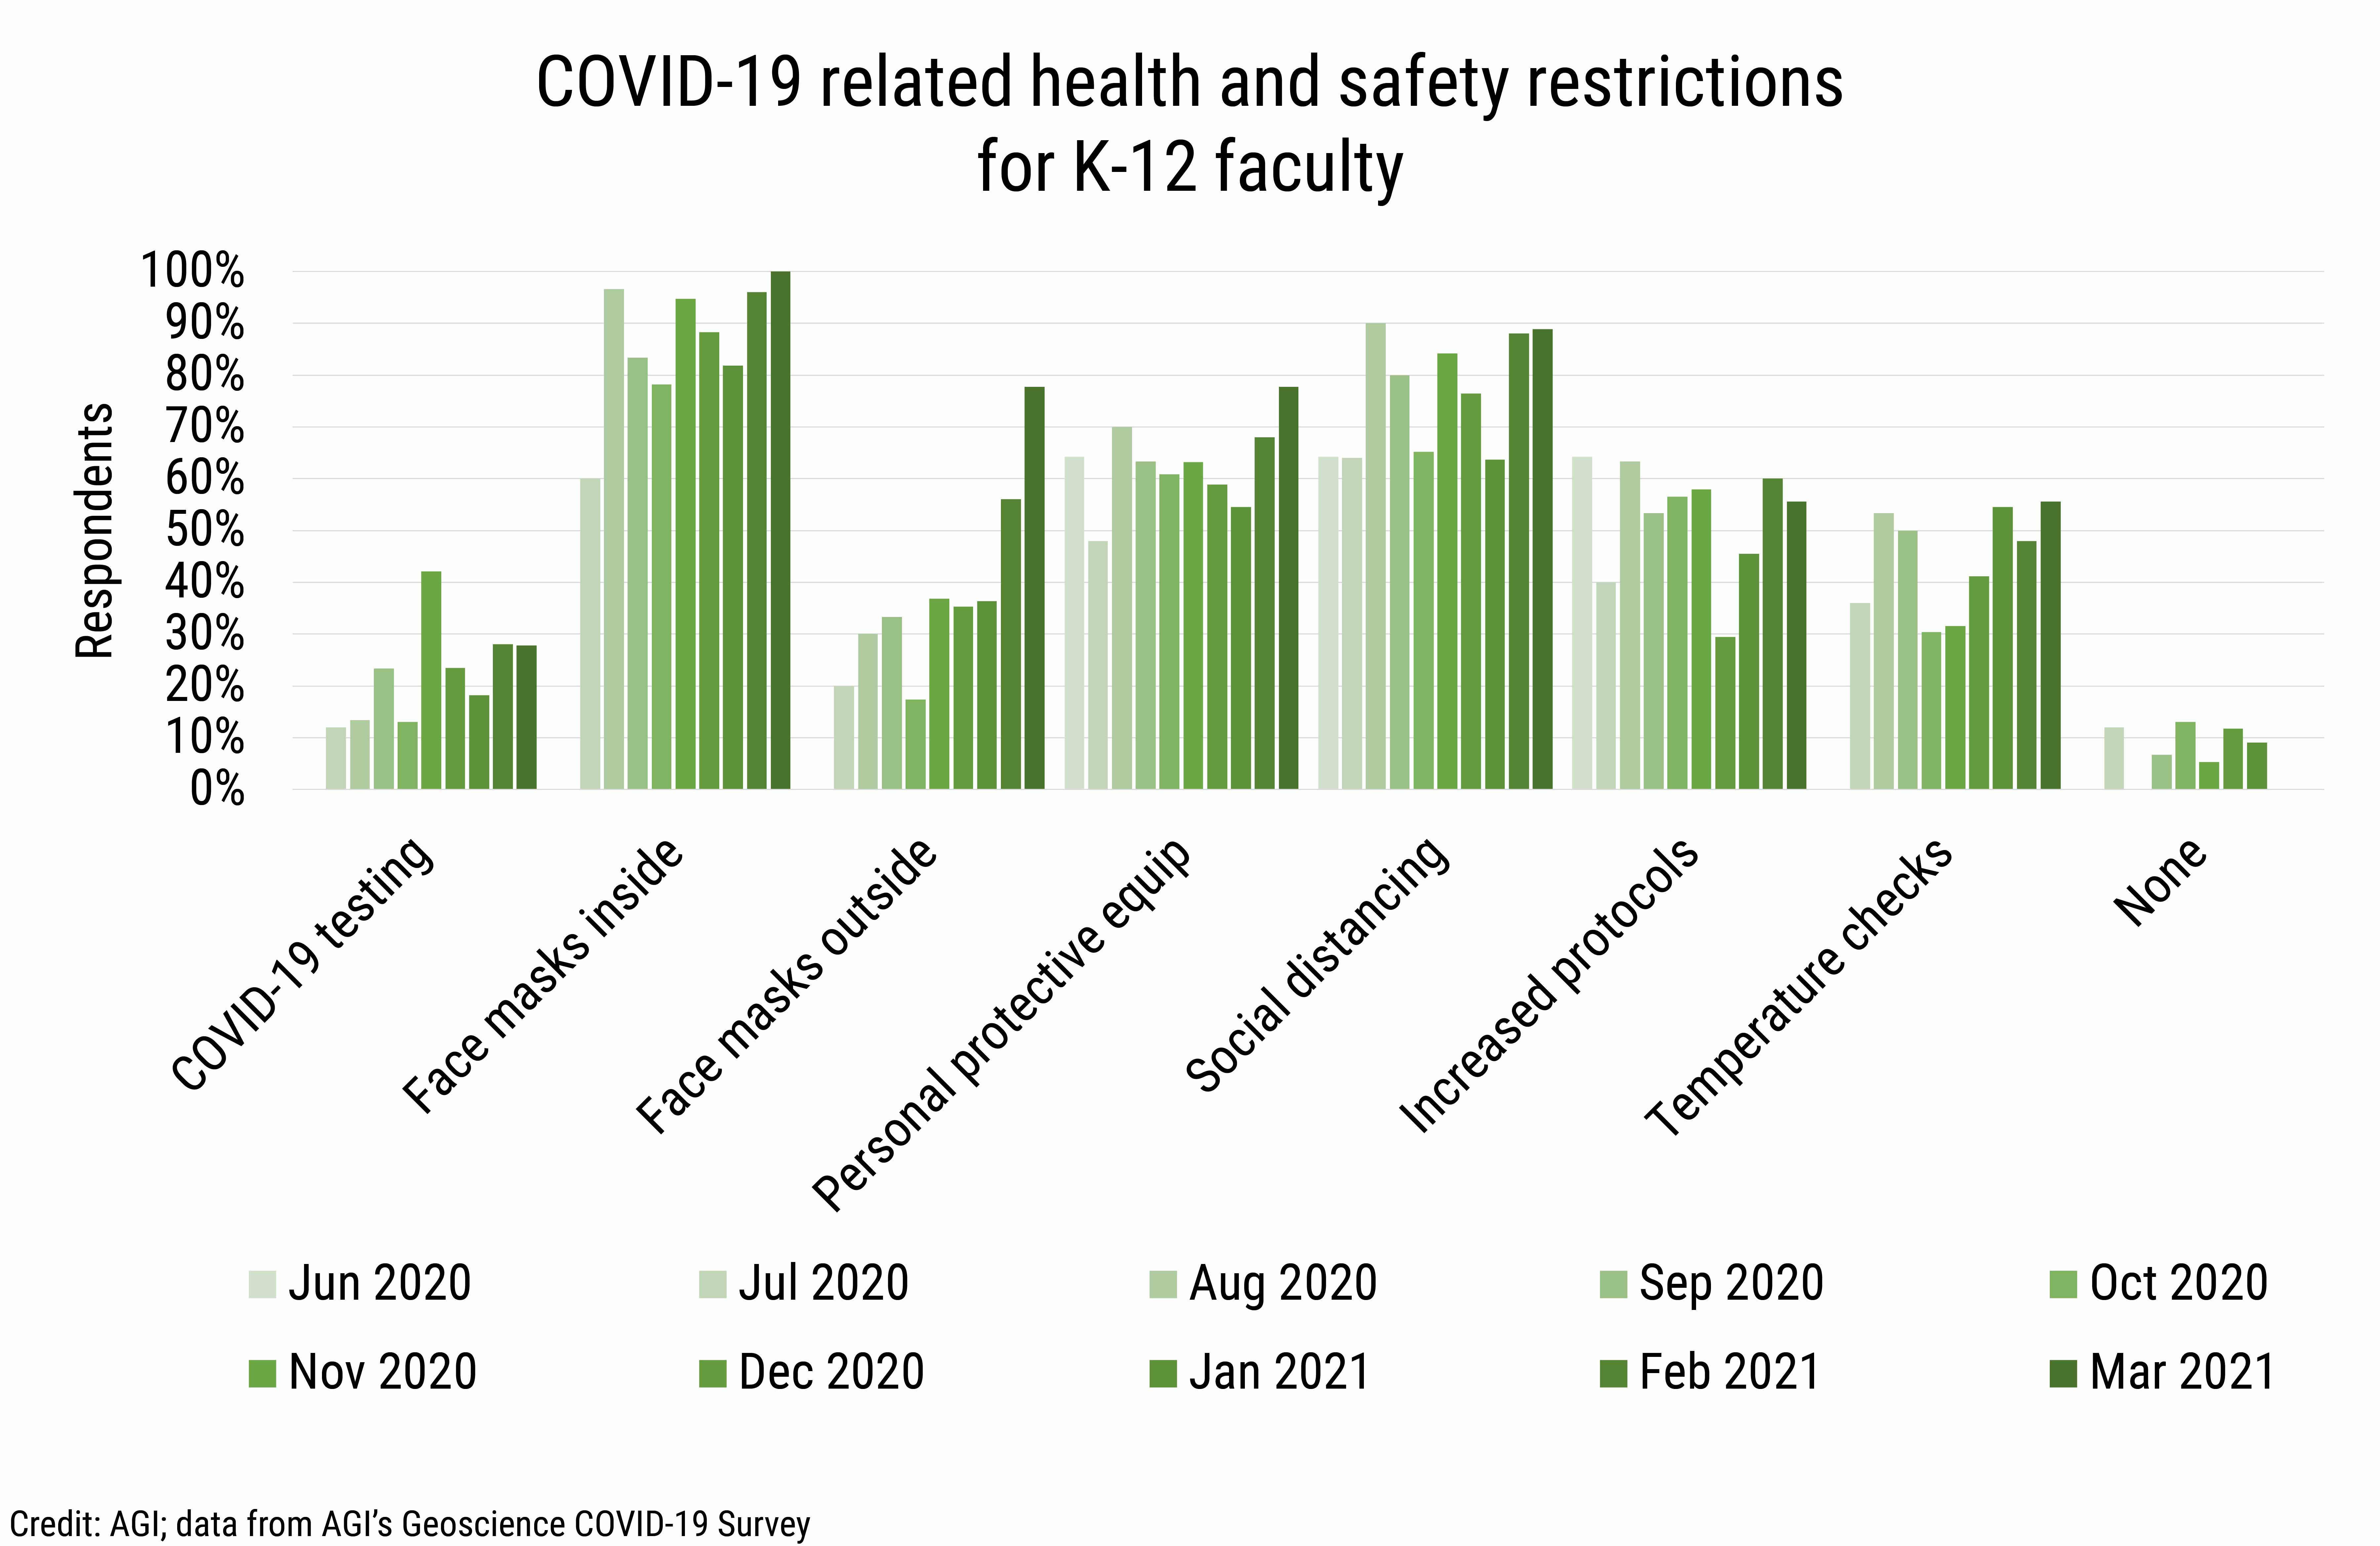 DB_2021-013 chart 05: COVID-19 related health and safety restrictions for K-12 faculty (Credit: AGI; data from AGI's Geoscience COVID-19 Survey)